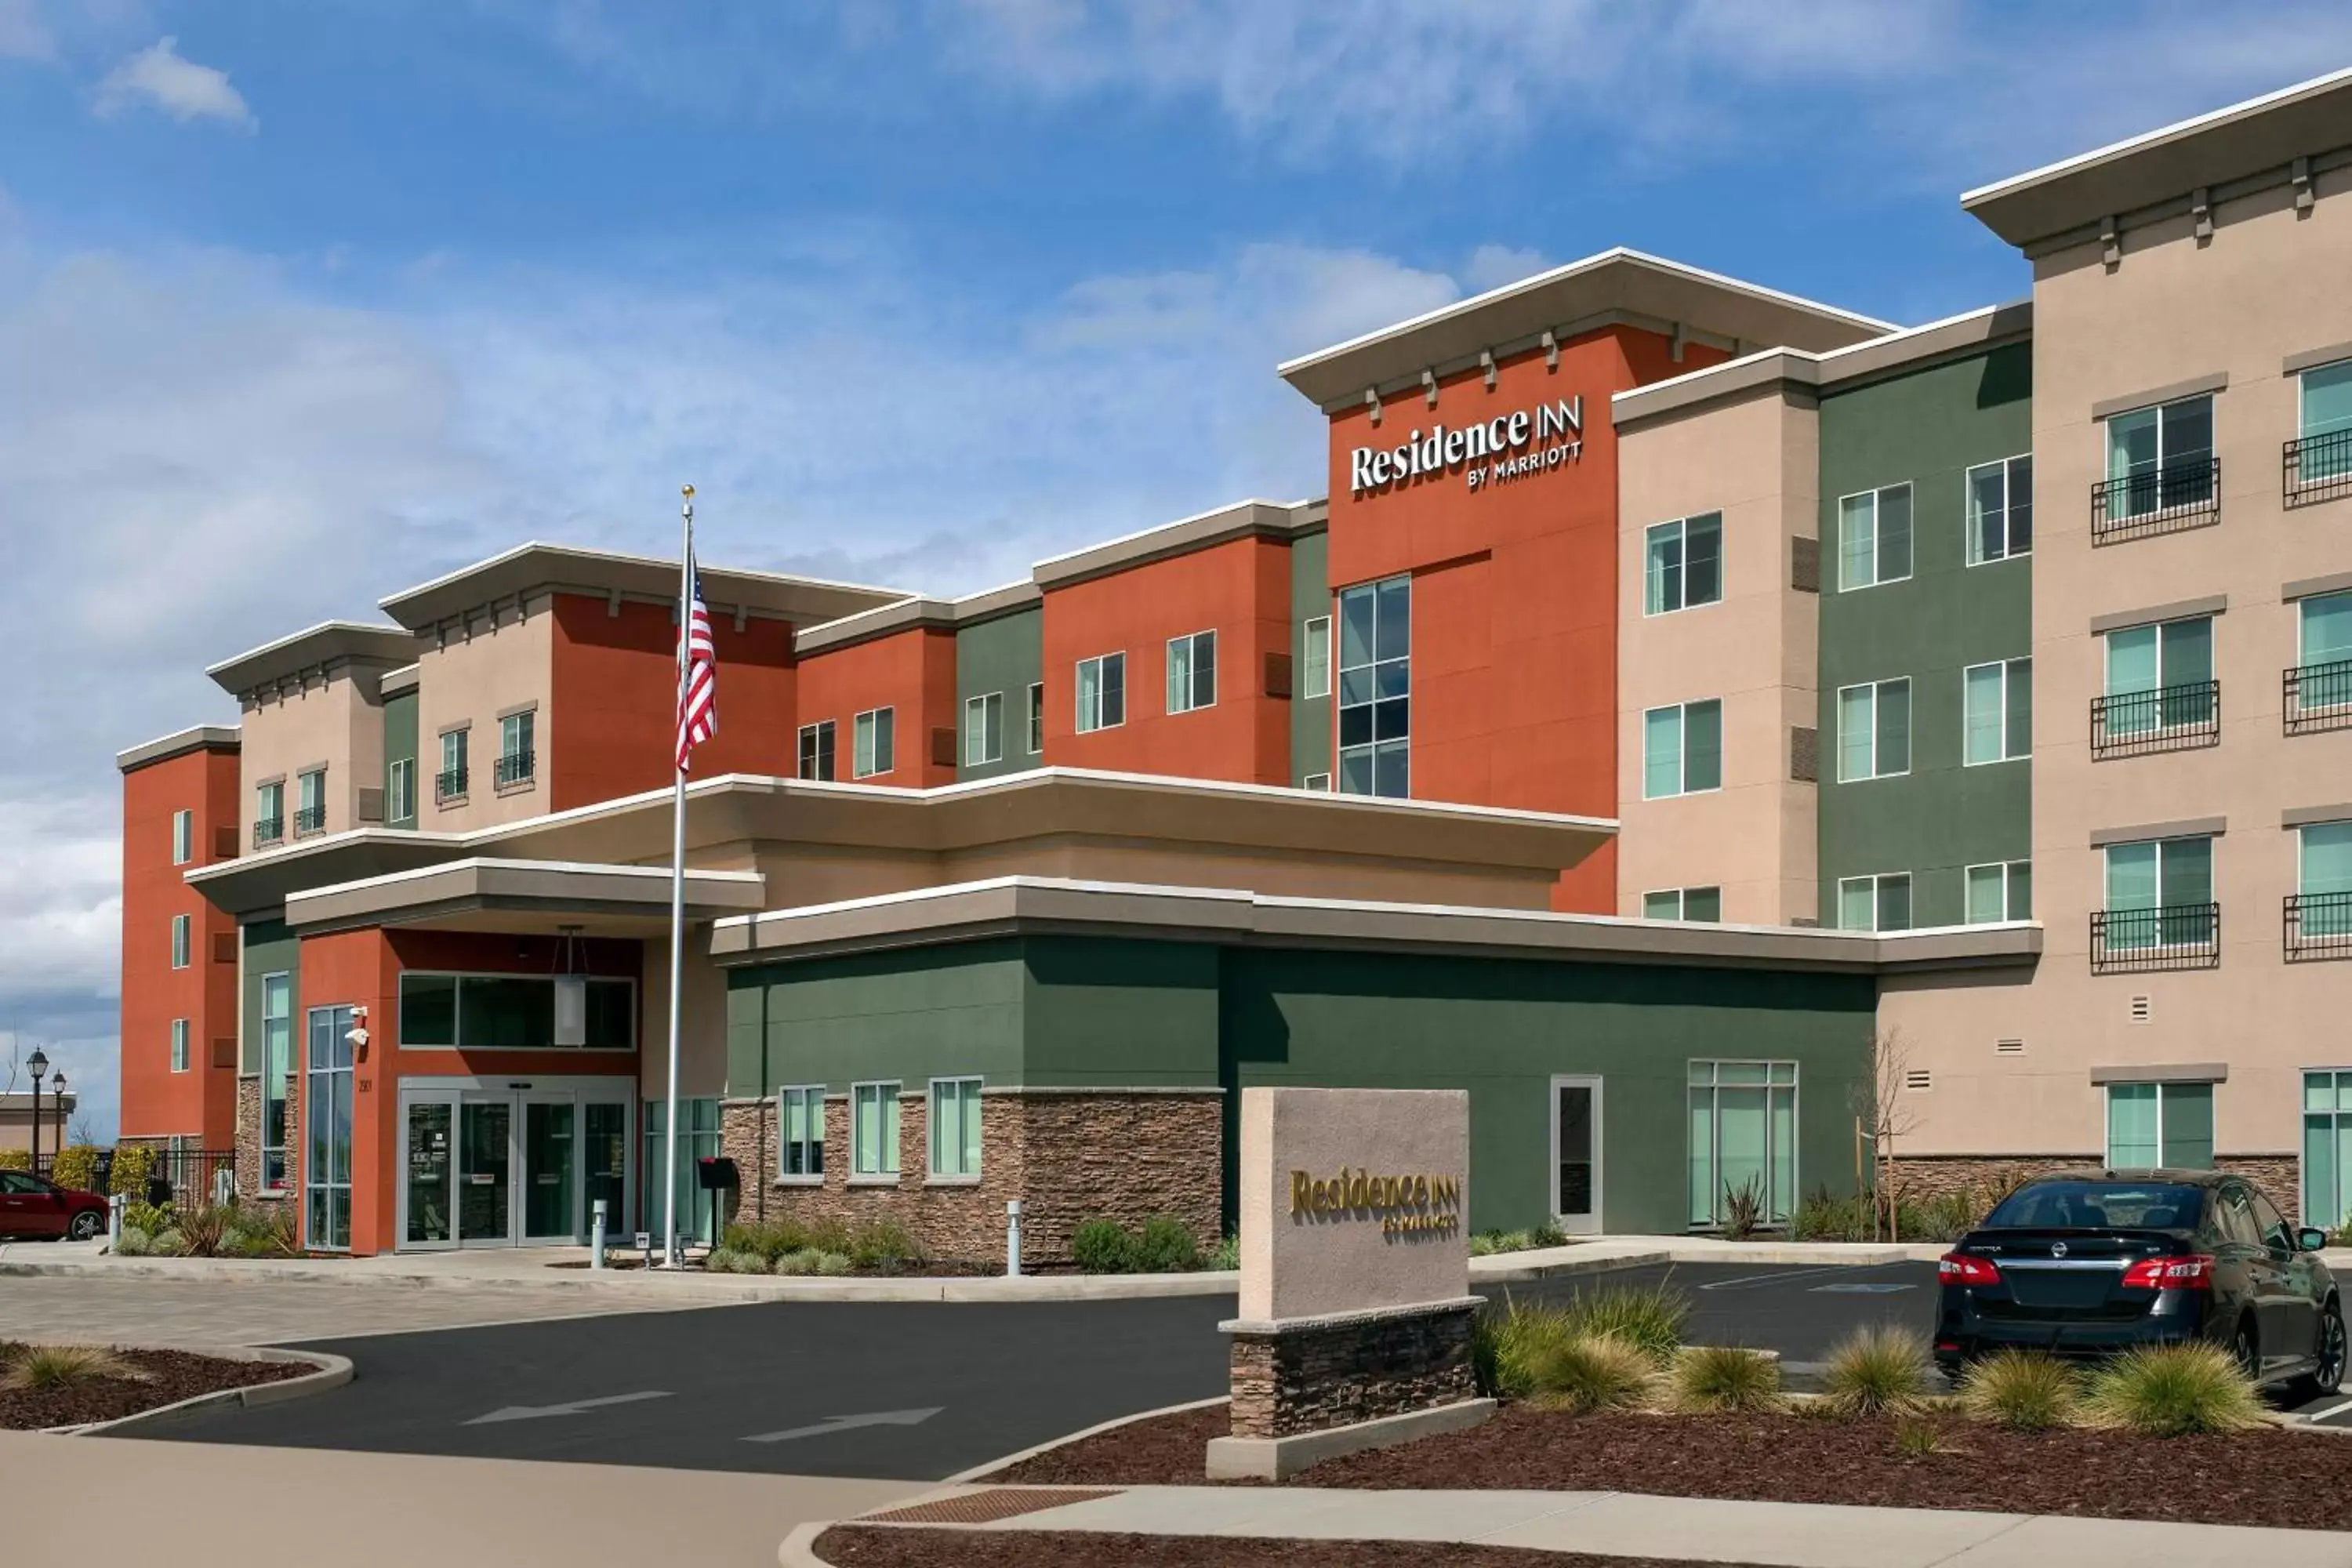 Property Building in Residence Inn by Marriott Modesto North